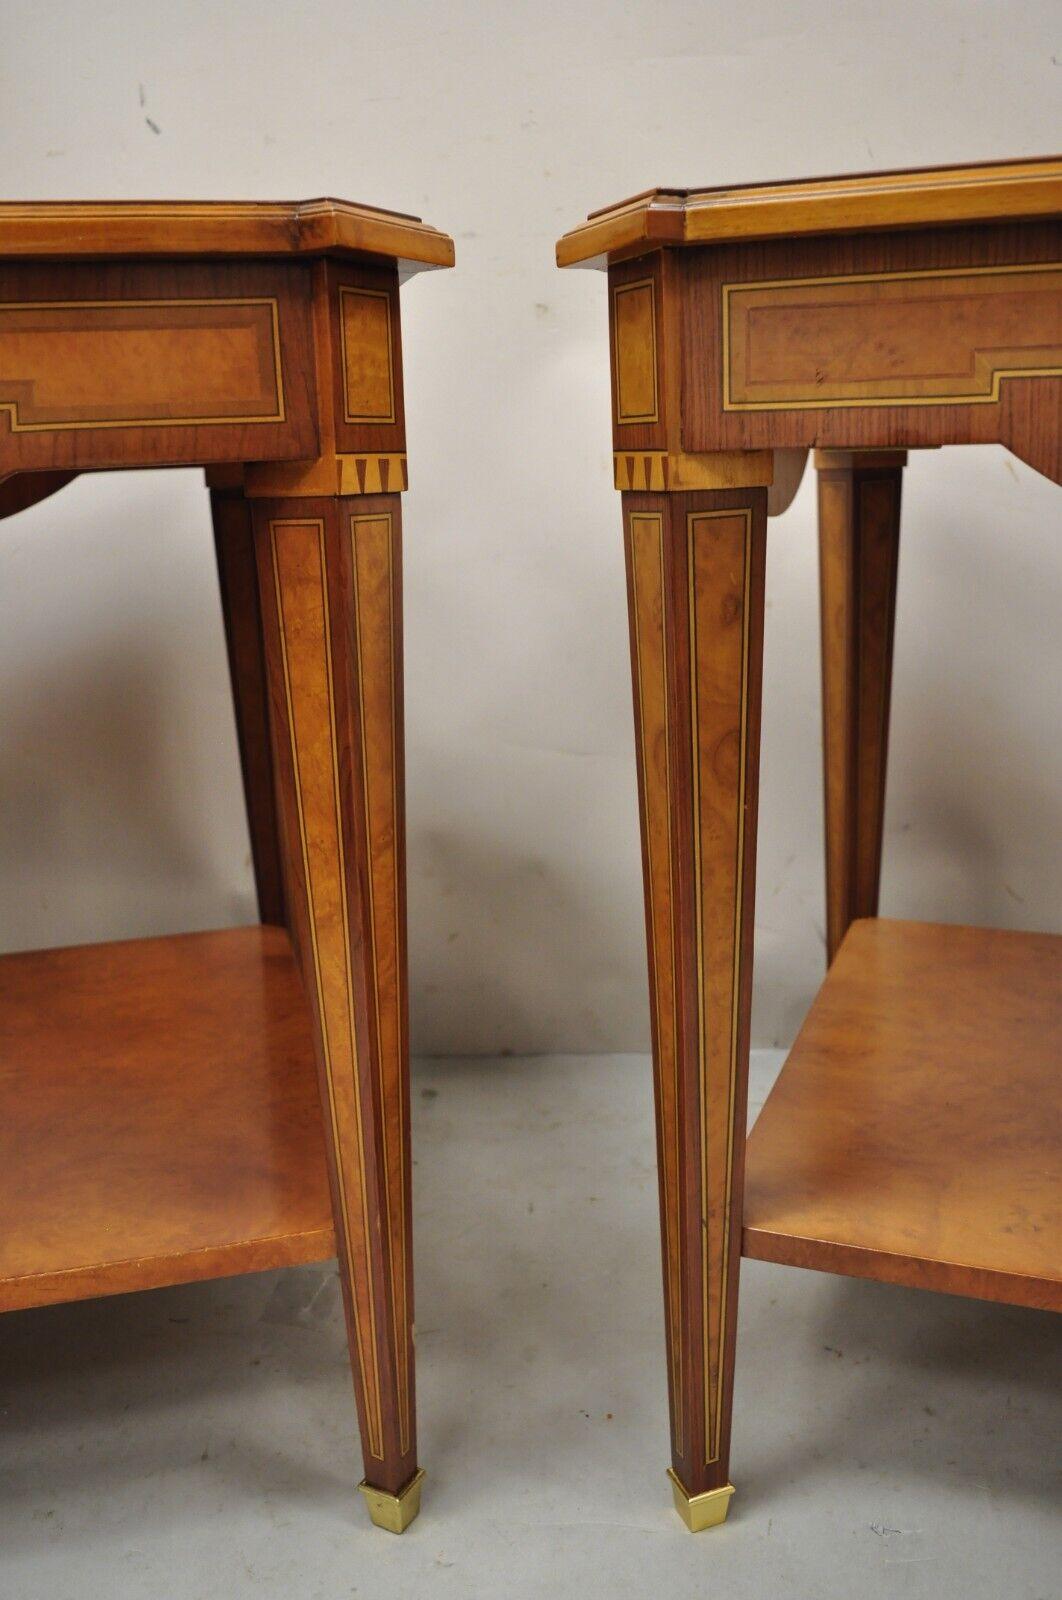 20th Century French Louis XVI Style Satinwood Inlay Side End Tables by Mudeva - a Pair       